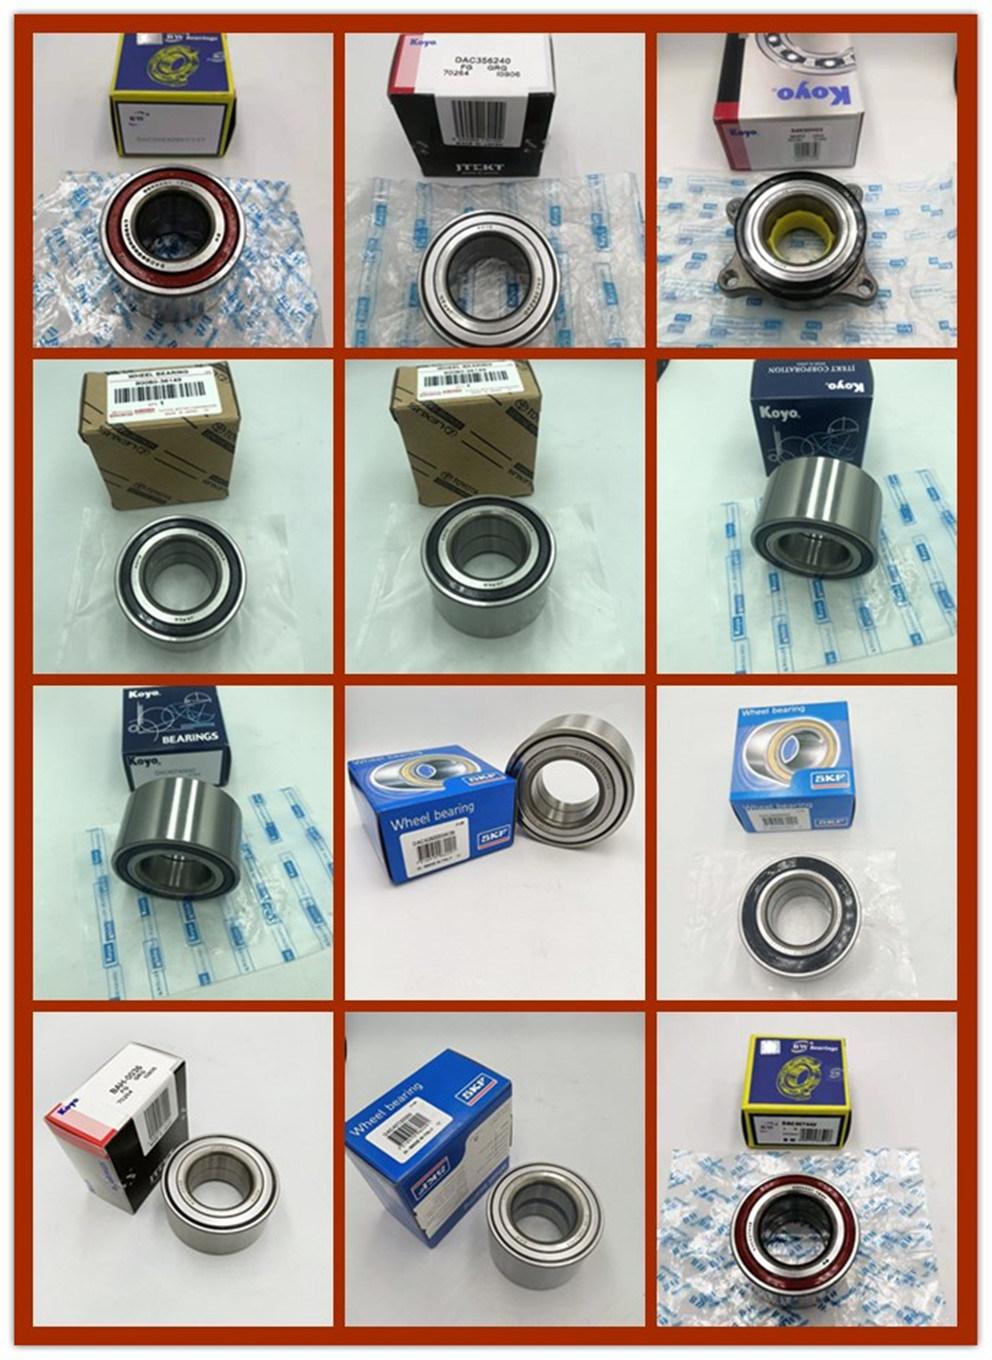 40215-D0100 0009804202 517201001 Vkhb2272 40215-D0100 Auto Bearing for Nissan Audi Auto Parts with Good Quality